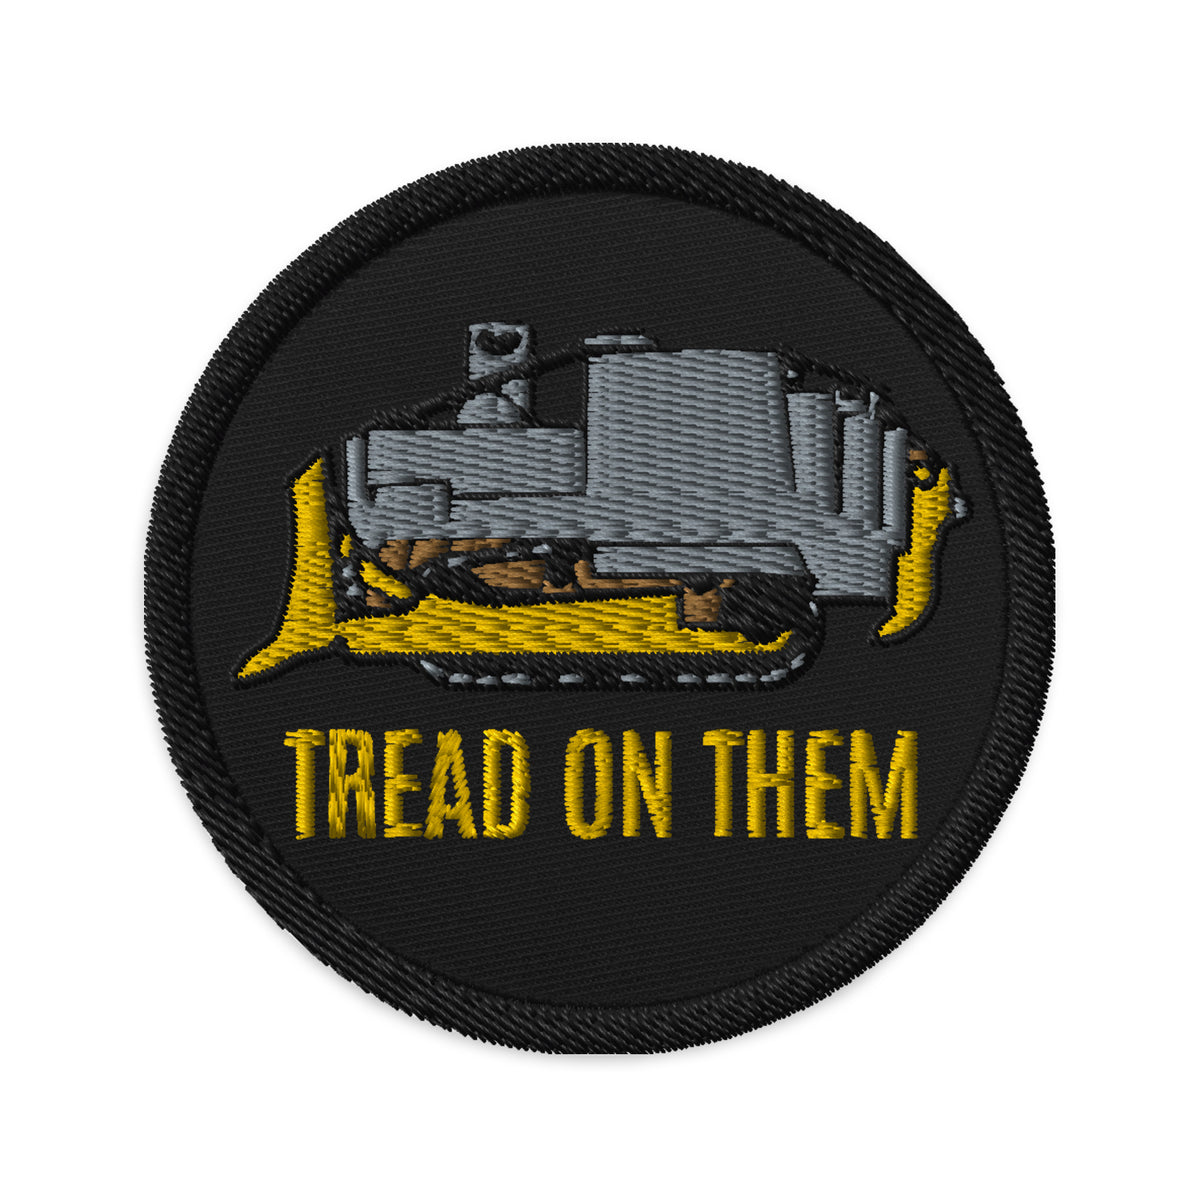 Don't Tread On Me Morale Patch — Hero Services